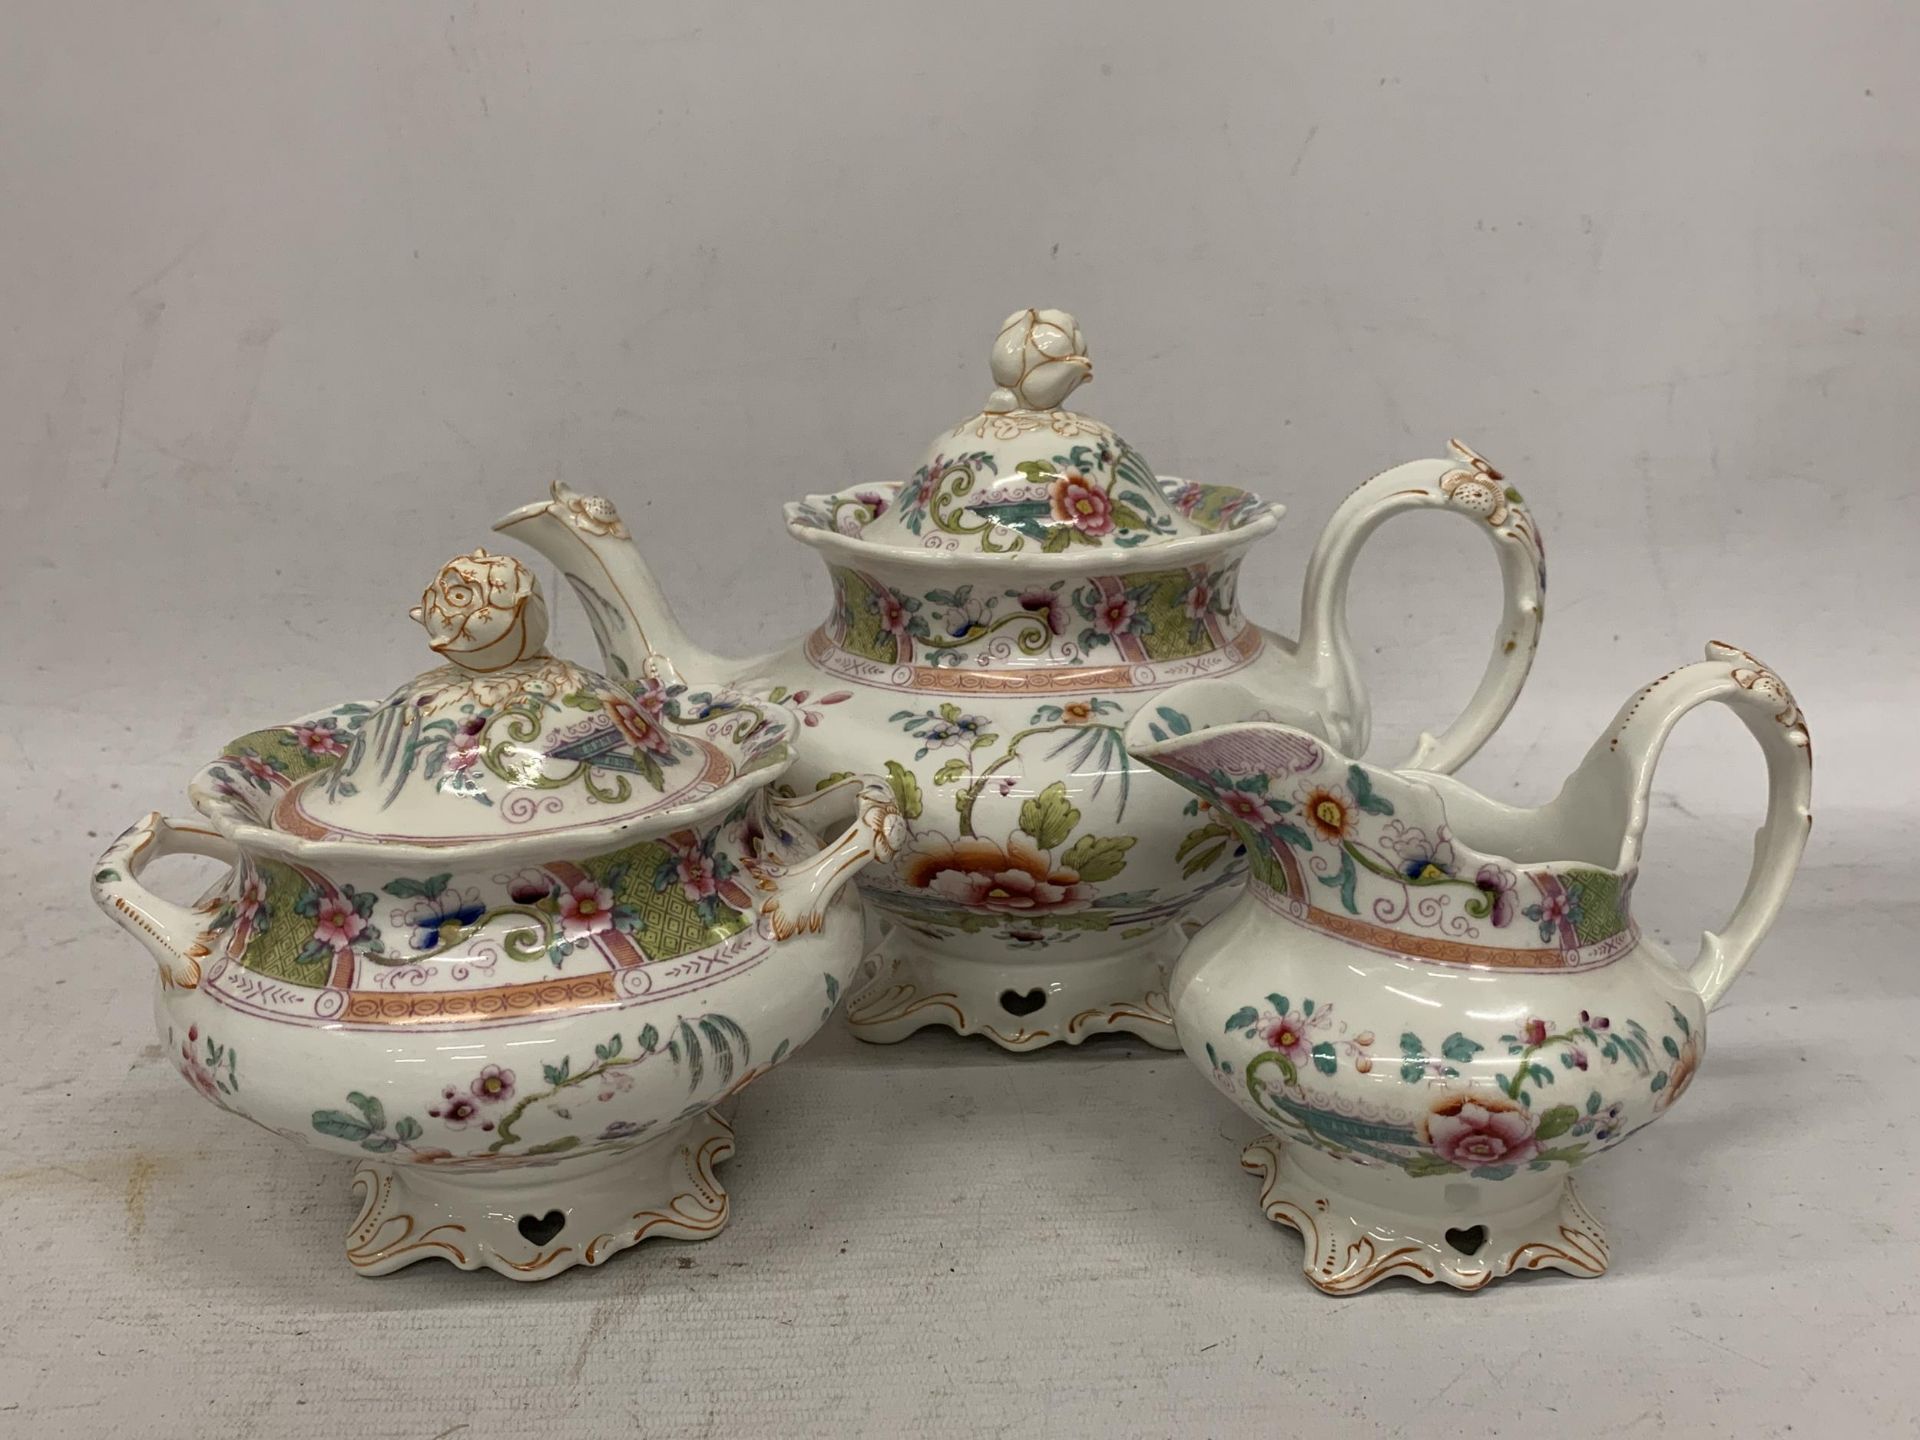 A 19TH CENTURY THREE PIECE TEA SET WITH ORIENTAL STYLE PATTERNED DESIGN